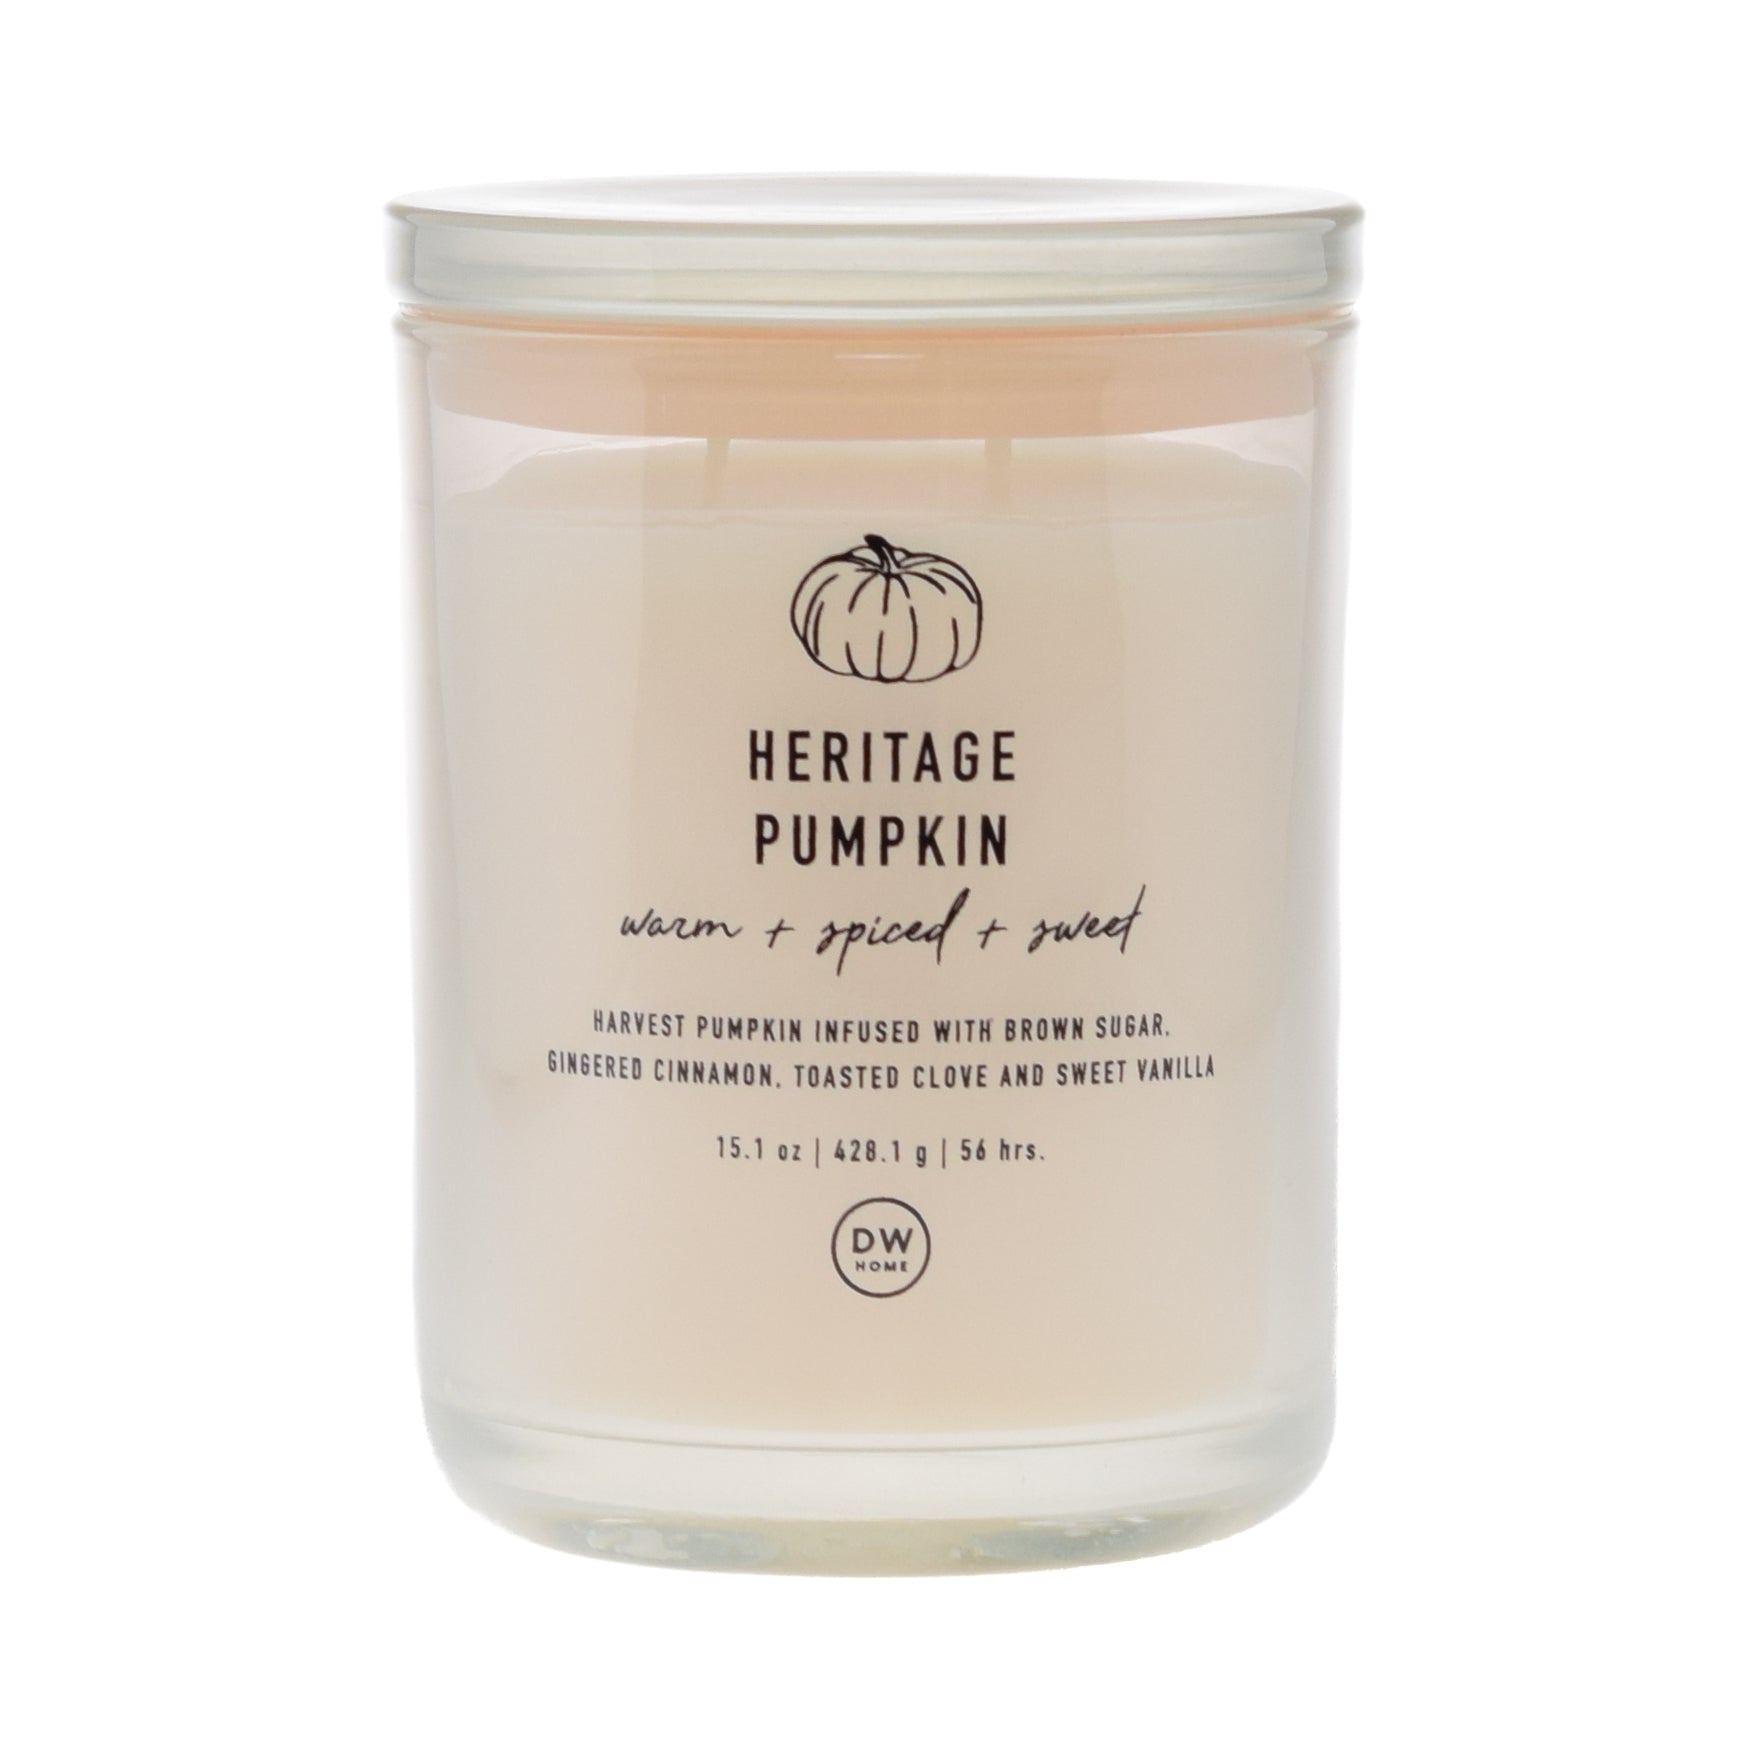 Heritage Pumpkin – DW Home Candles